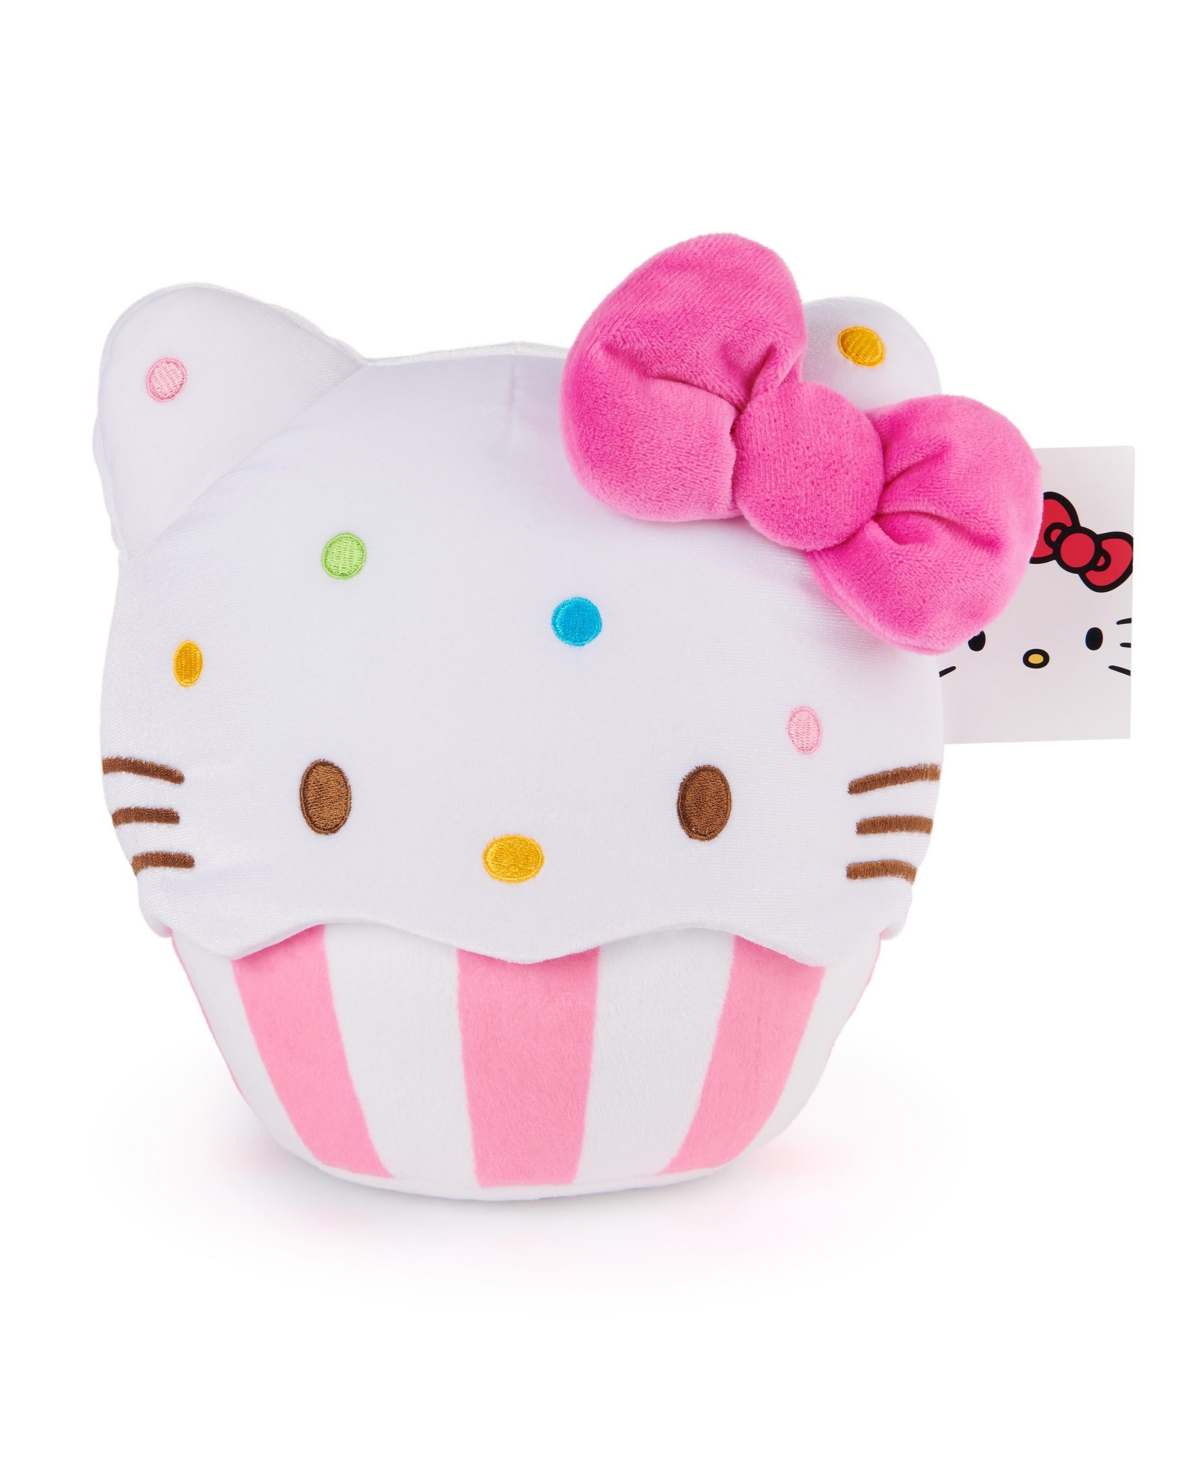 Hello Kitty Gund Sanrio Official  Cupcake Plush, Stuffed Animal, For Ages 3 And Up, 9" In Multi-color